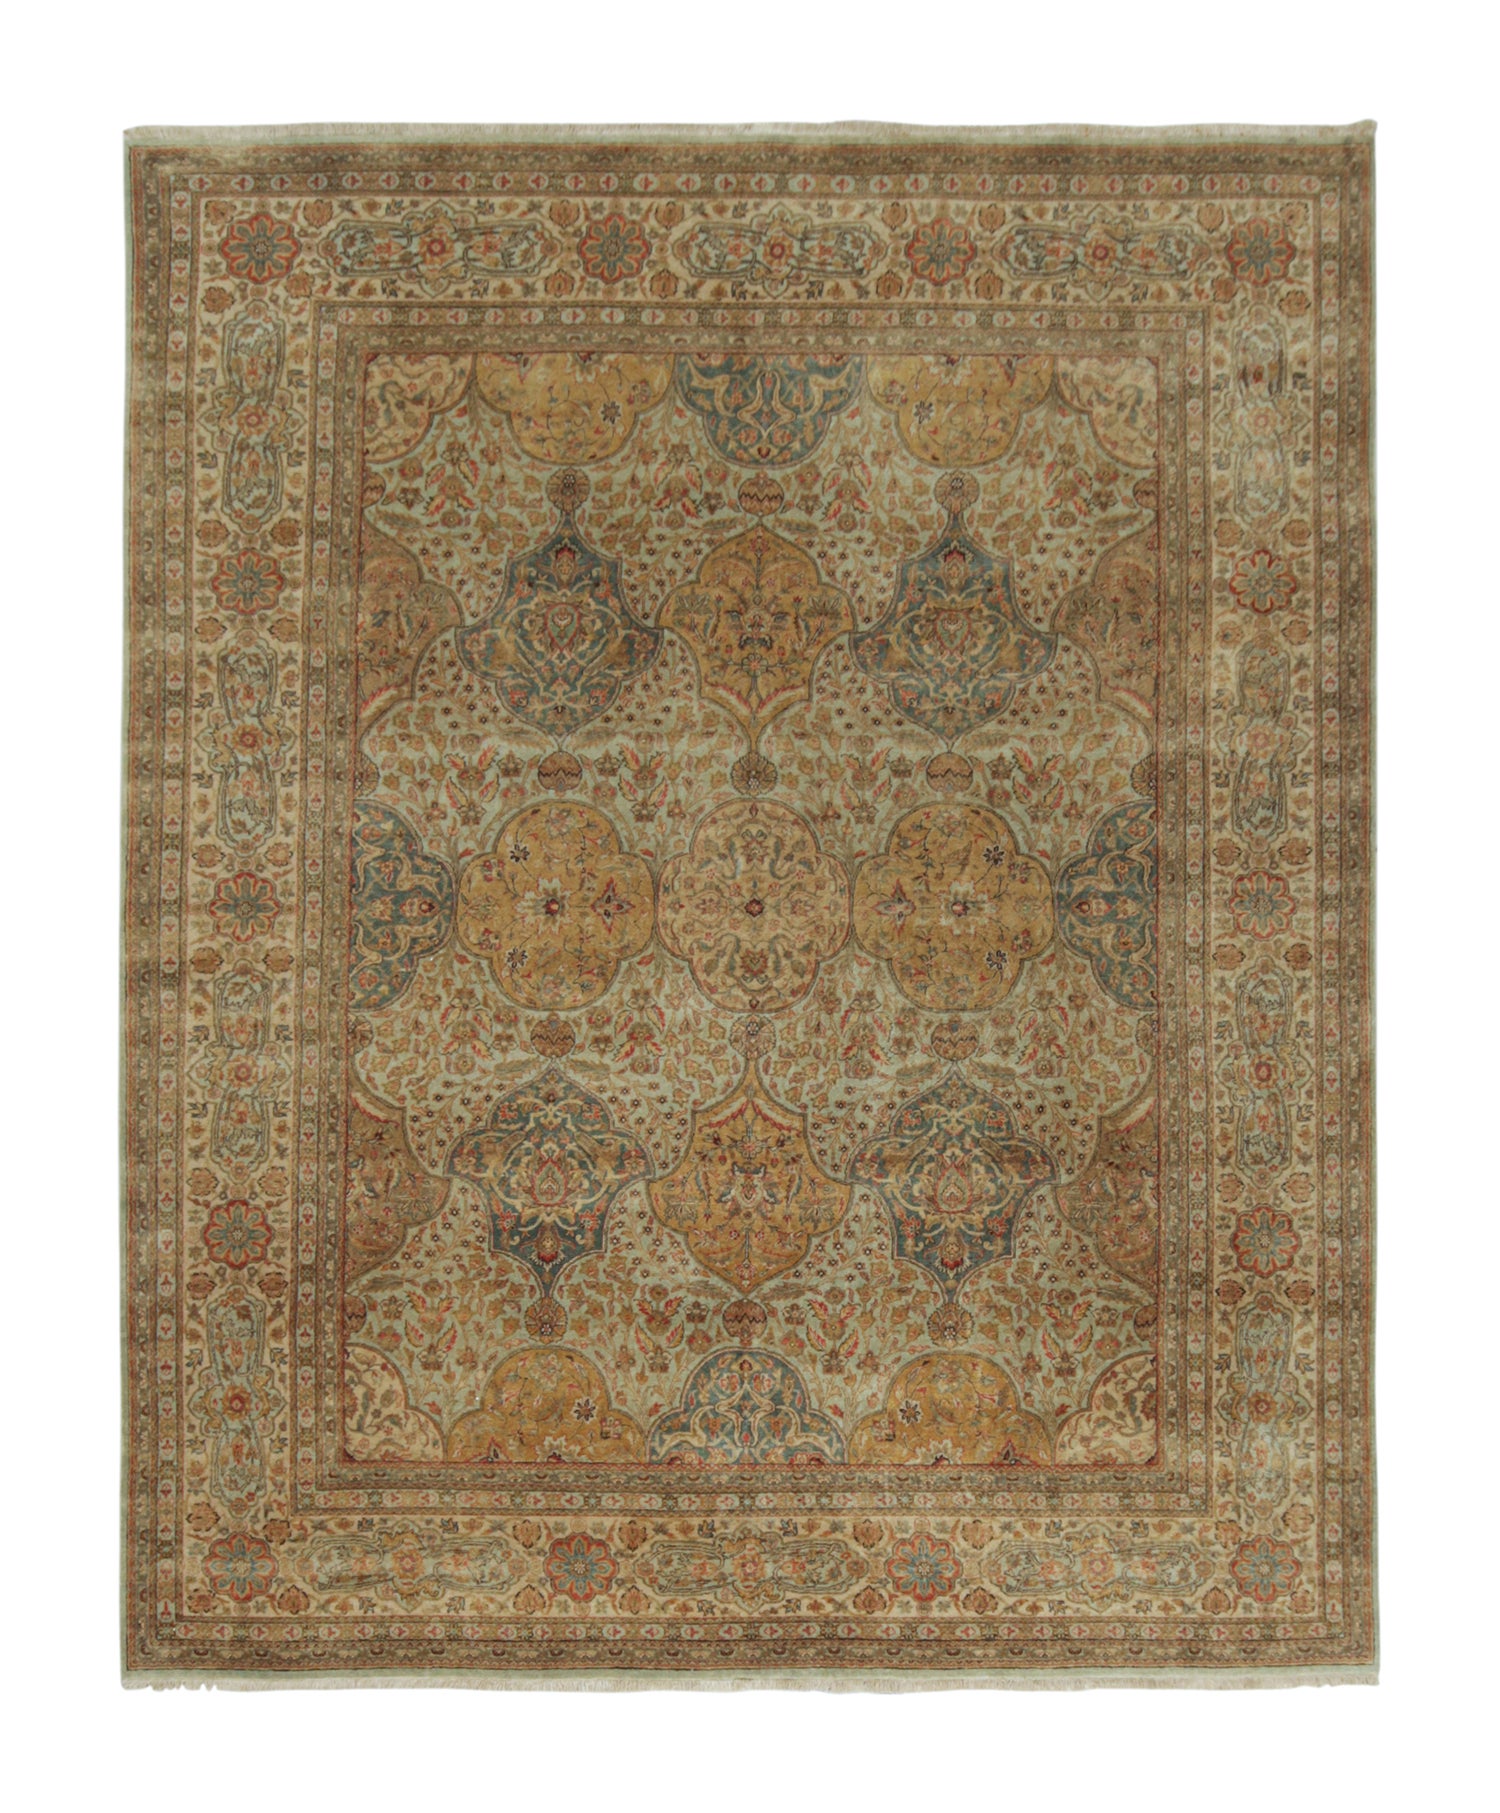 Rug & Kilim’s Classic style rug with Gold, Beige and Green Floral patterns